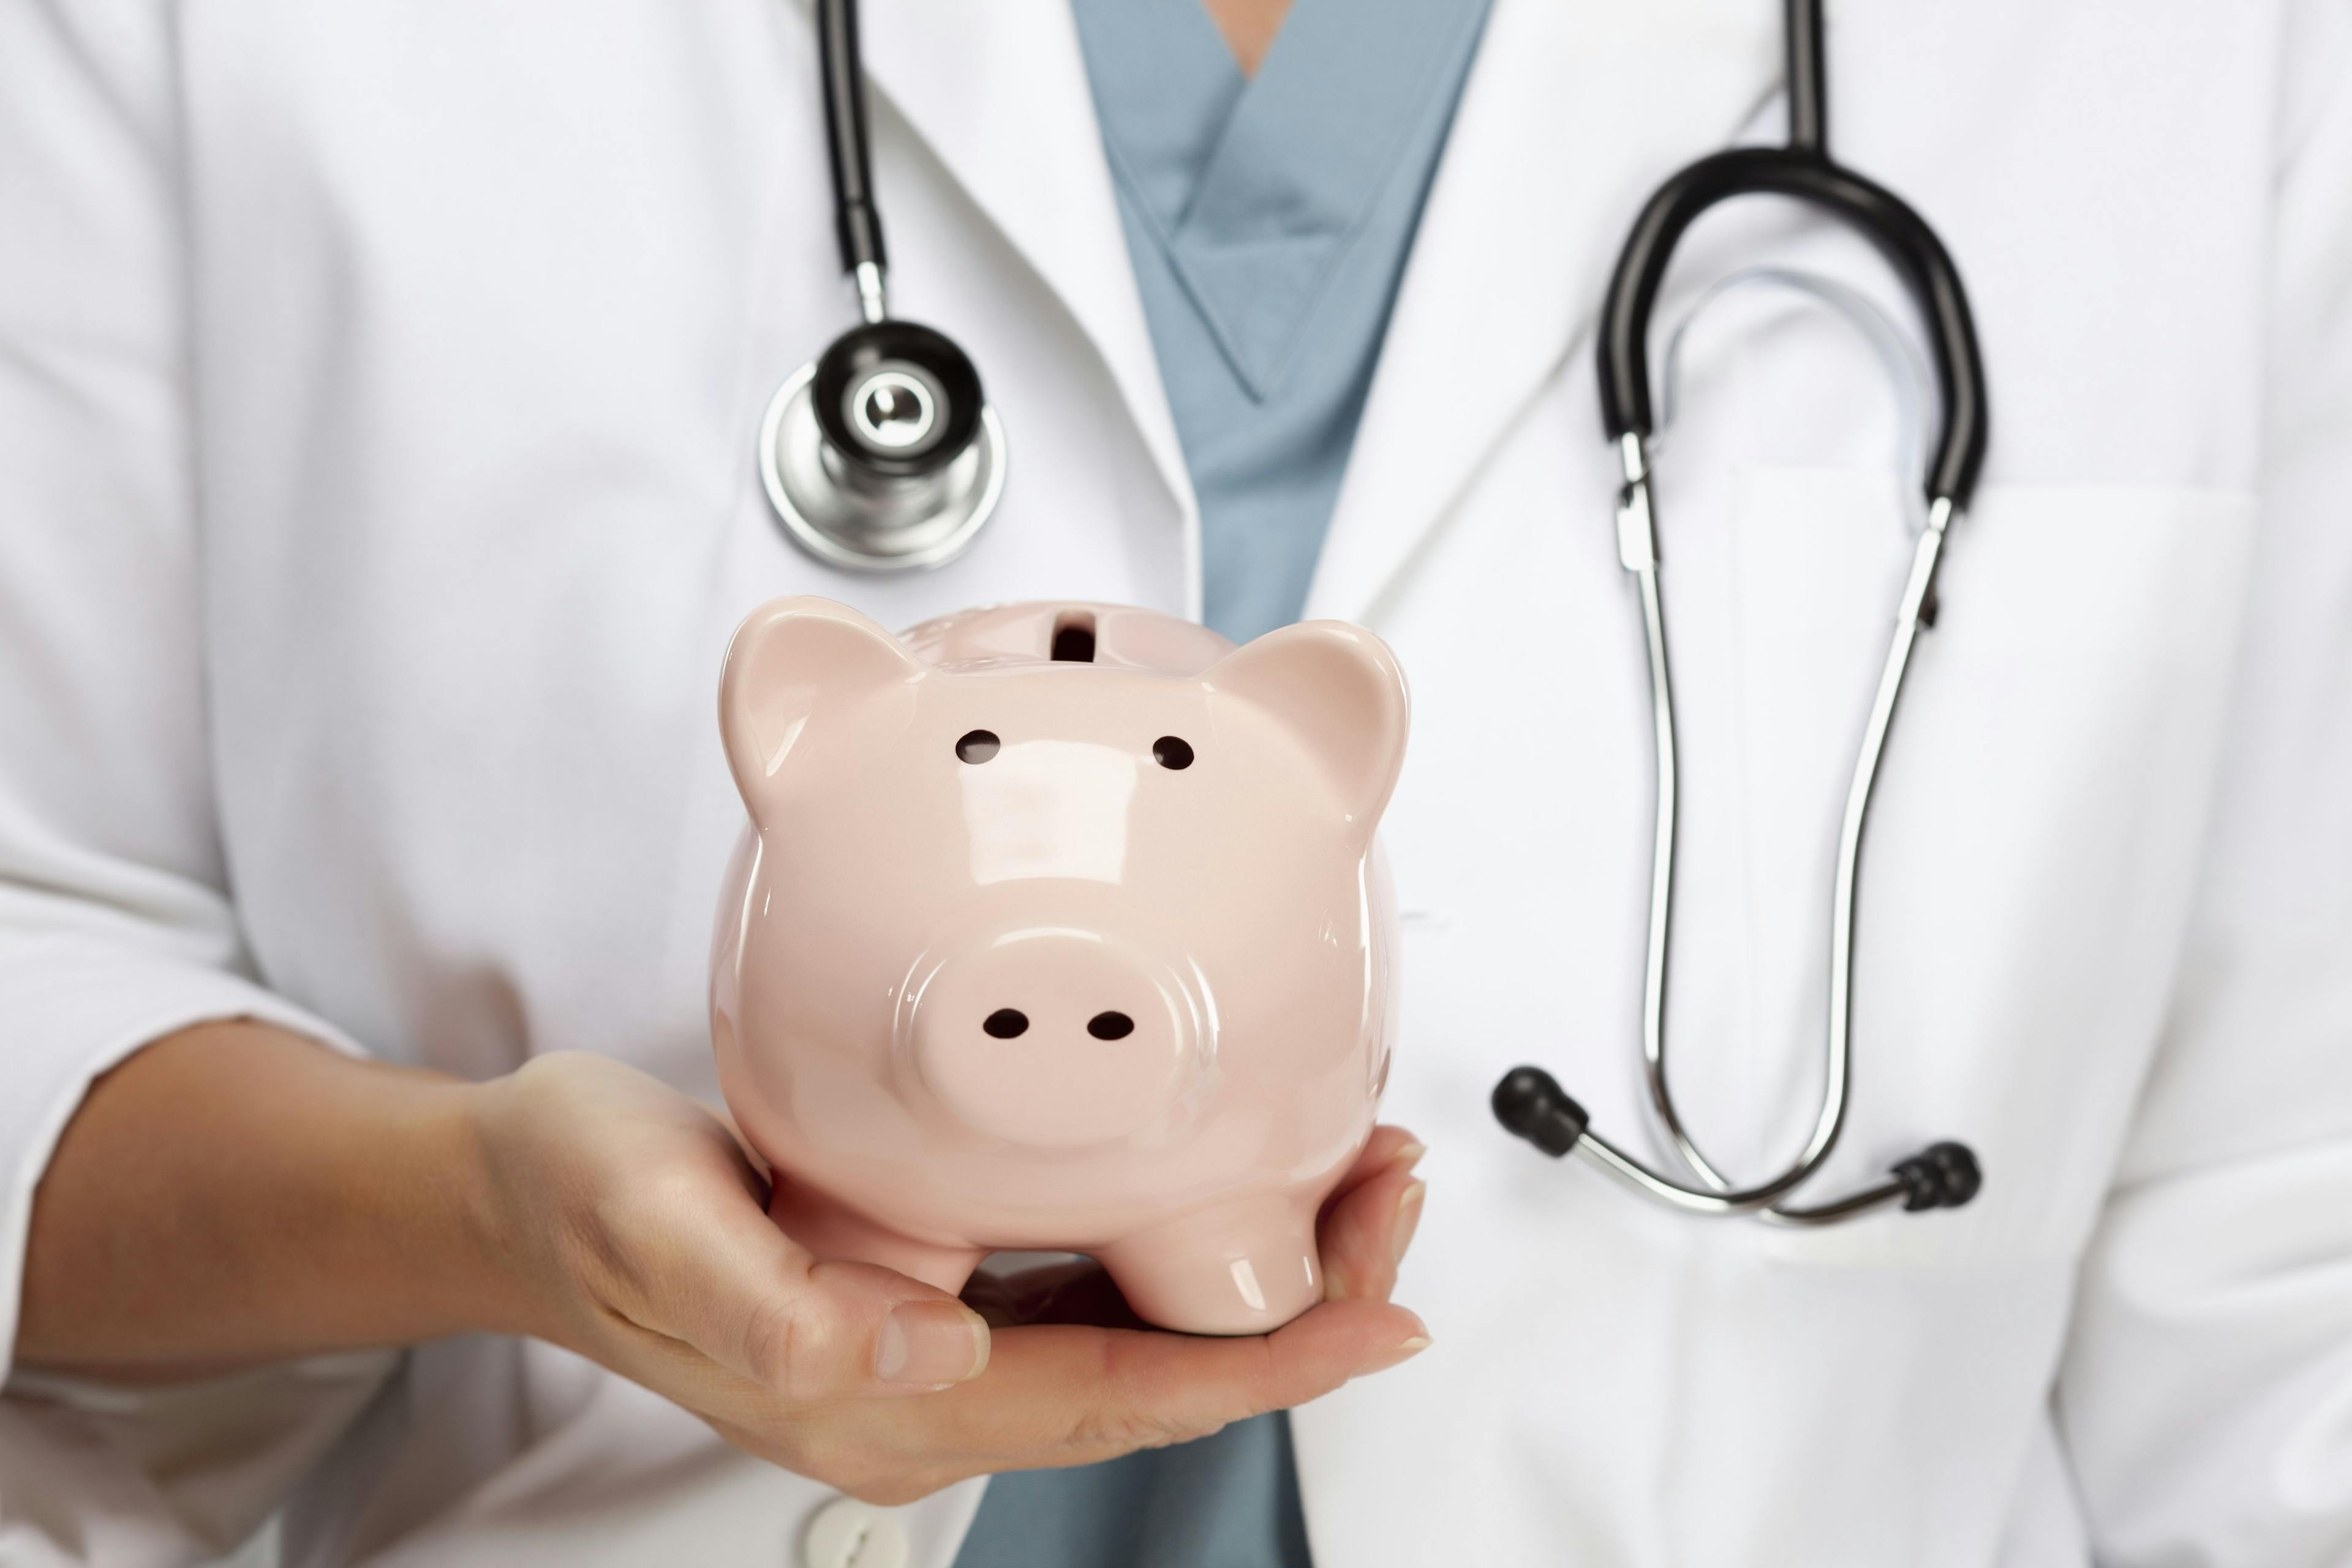 Male physicians in Maryland make nearly 50% more than female physicians